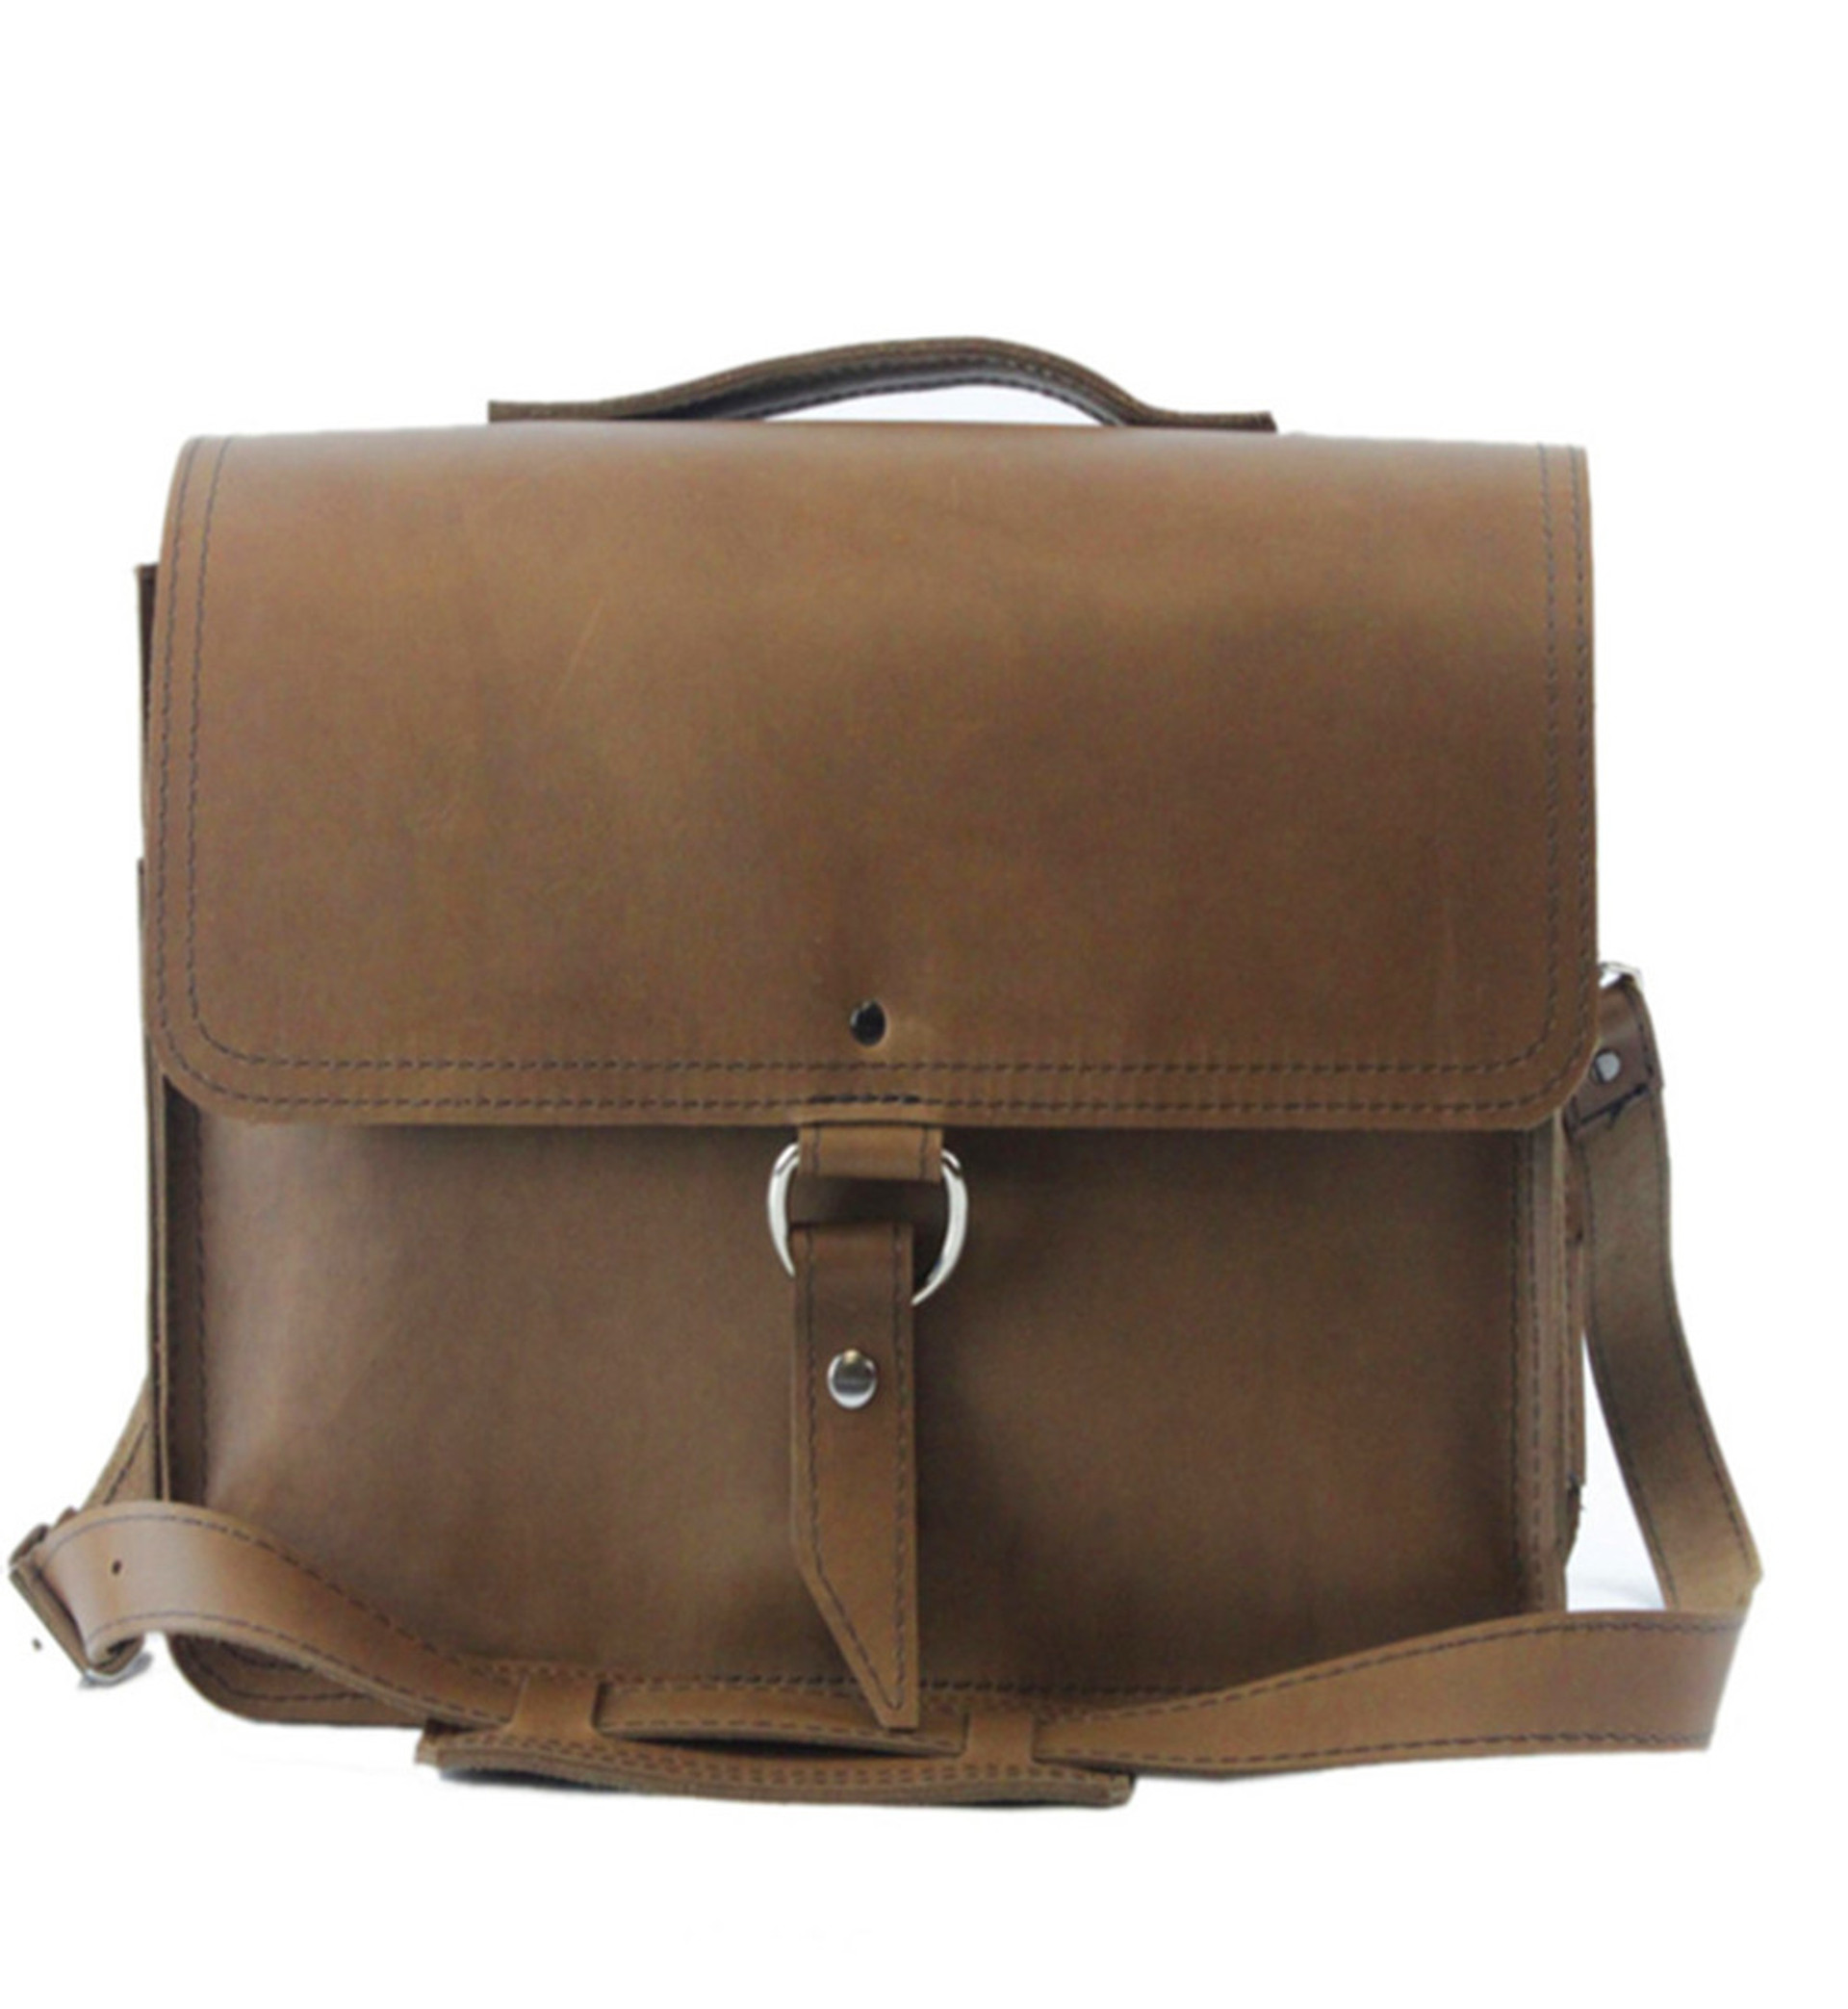 Buy Leather Bags for Ipad, Tablets – Leather Ipad Shoulder Bags